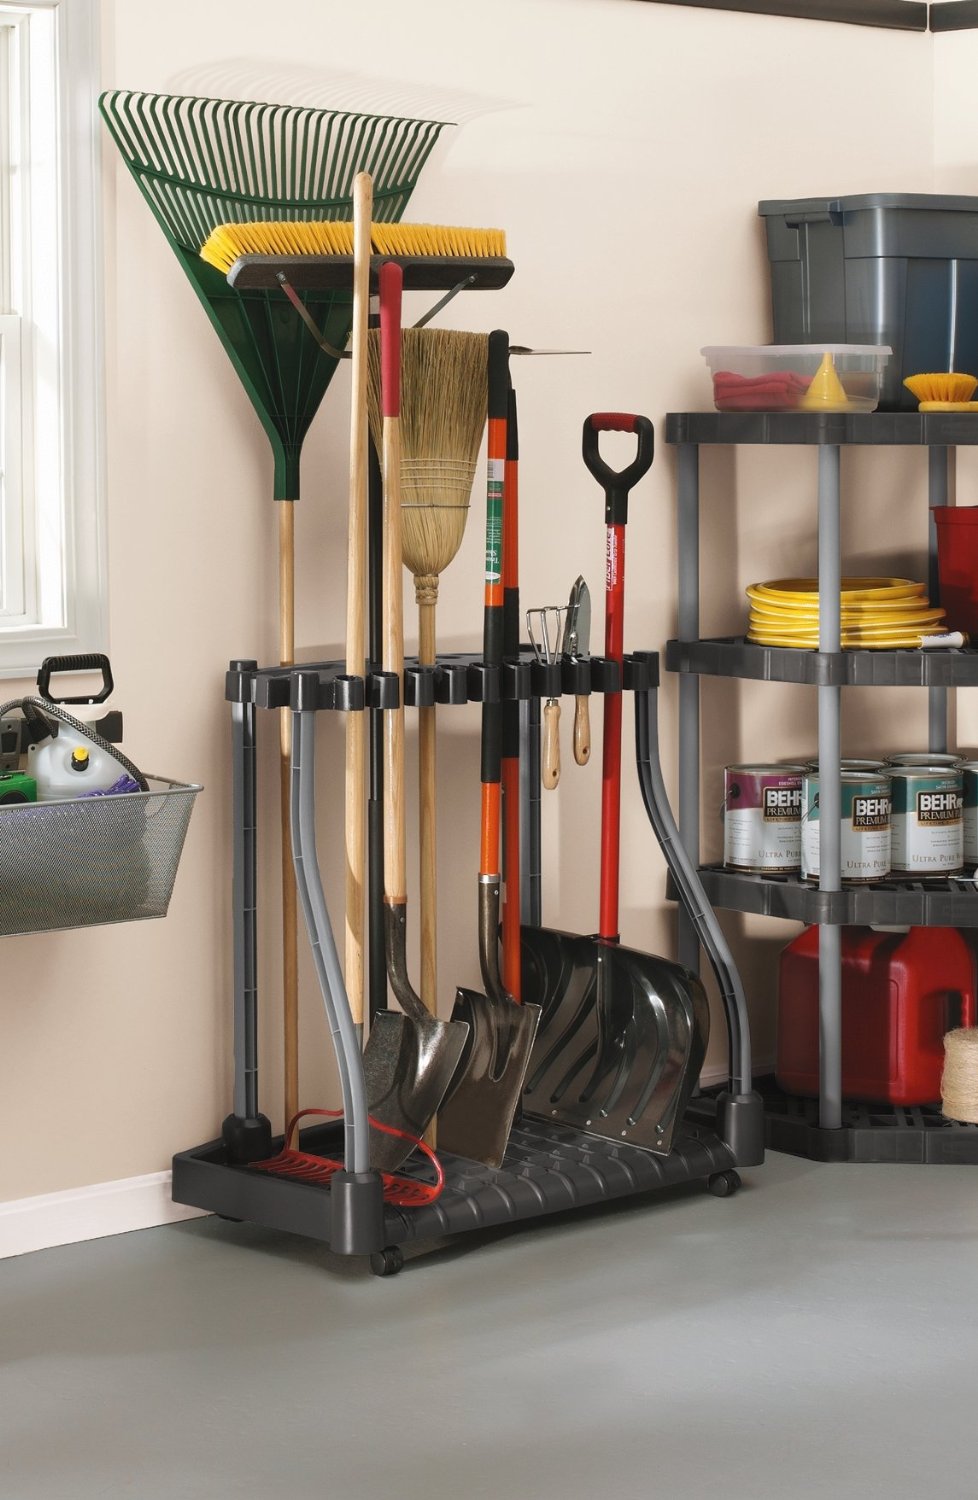 rubbermaid-deluxe-tool-tower-rack-with-casters